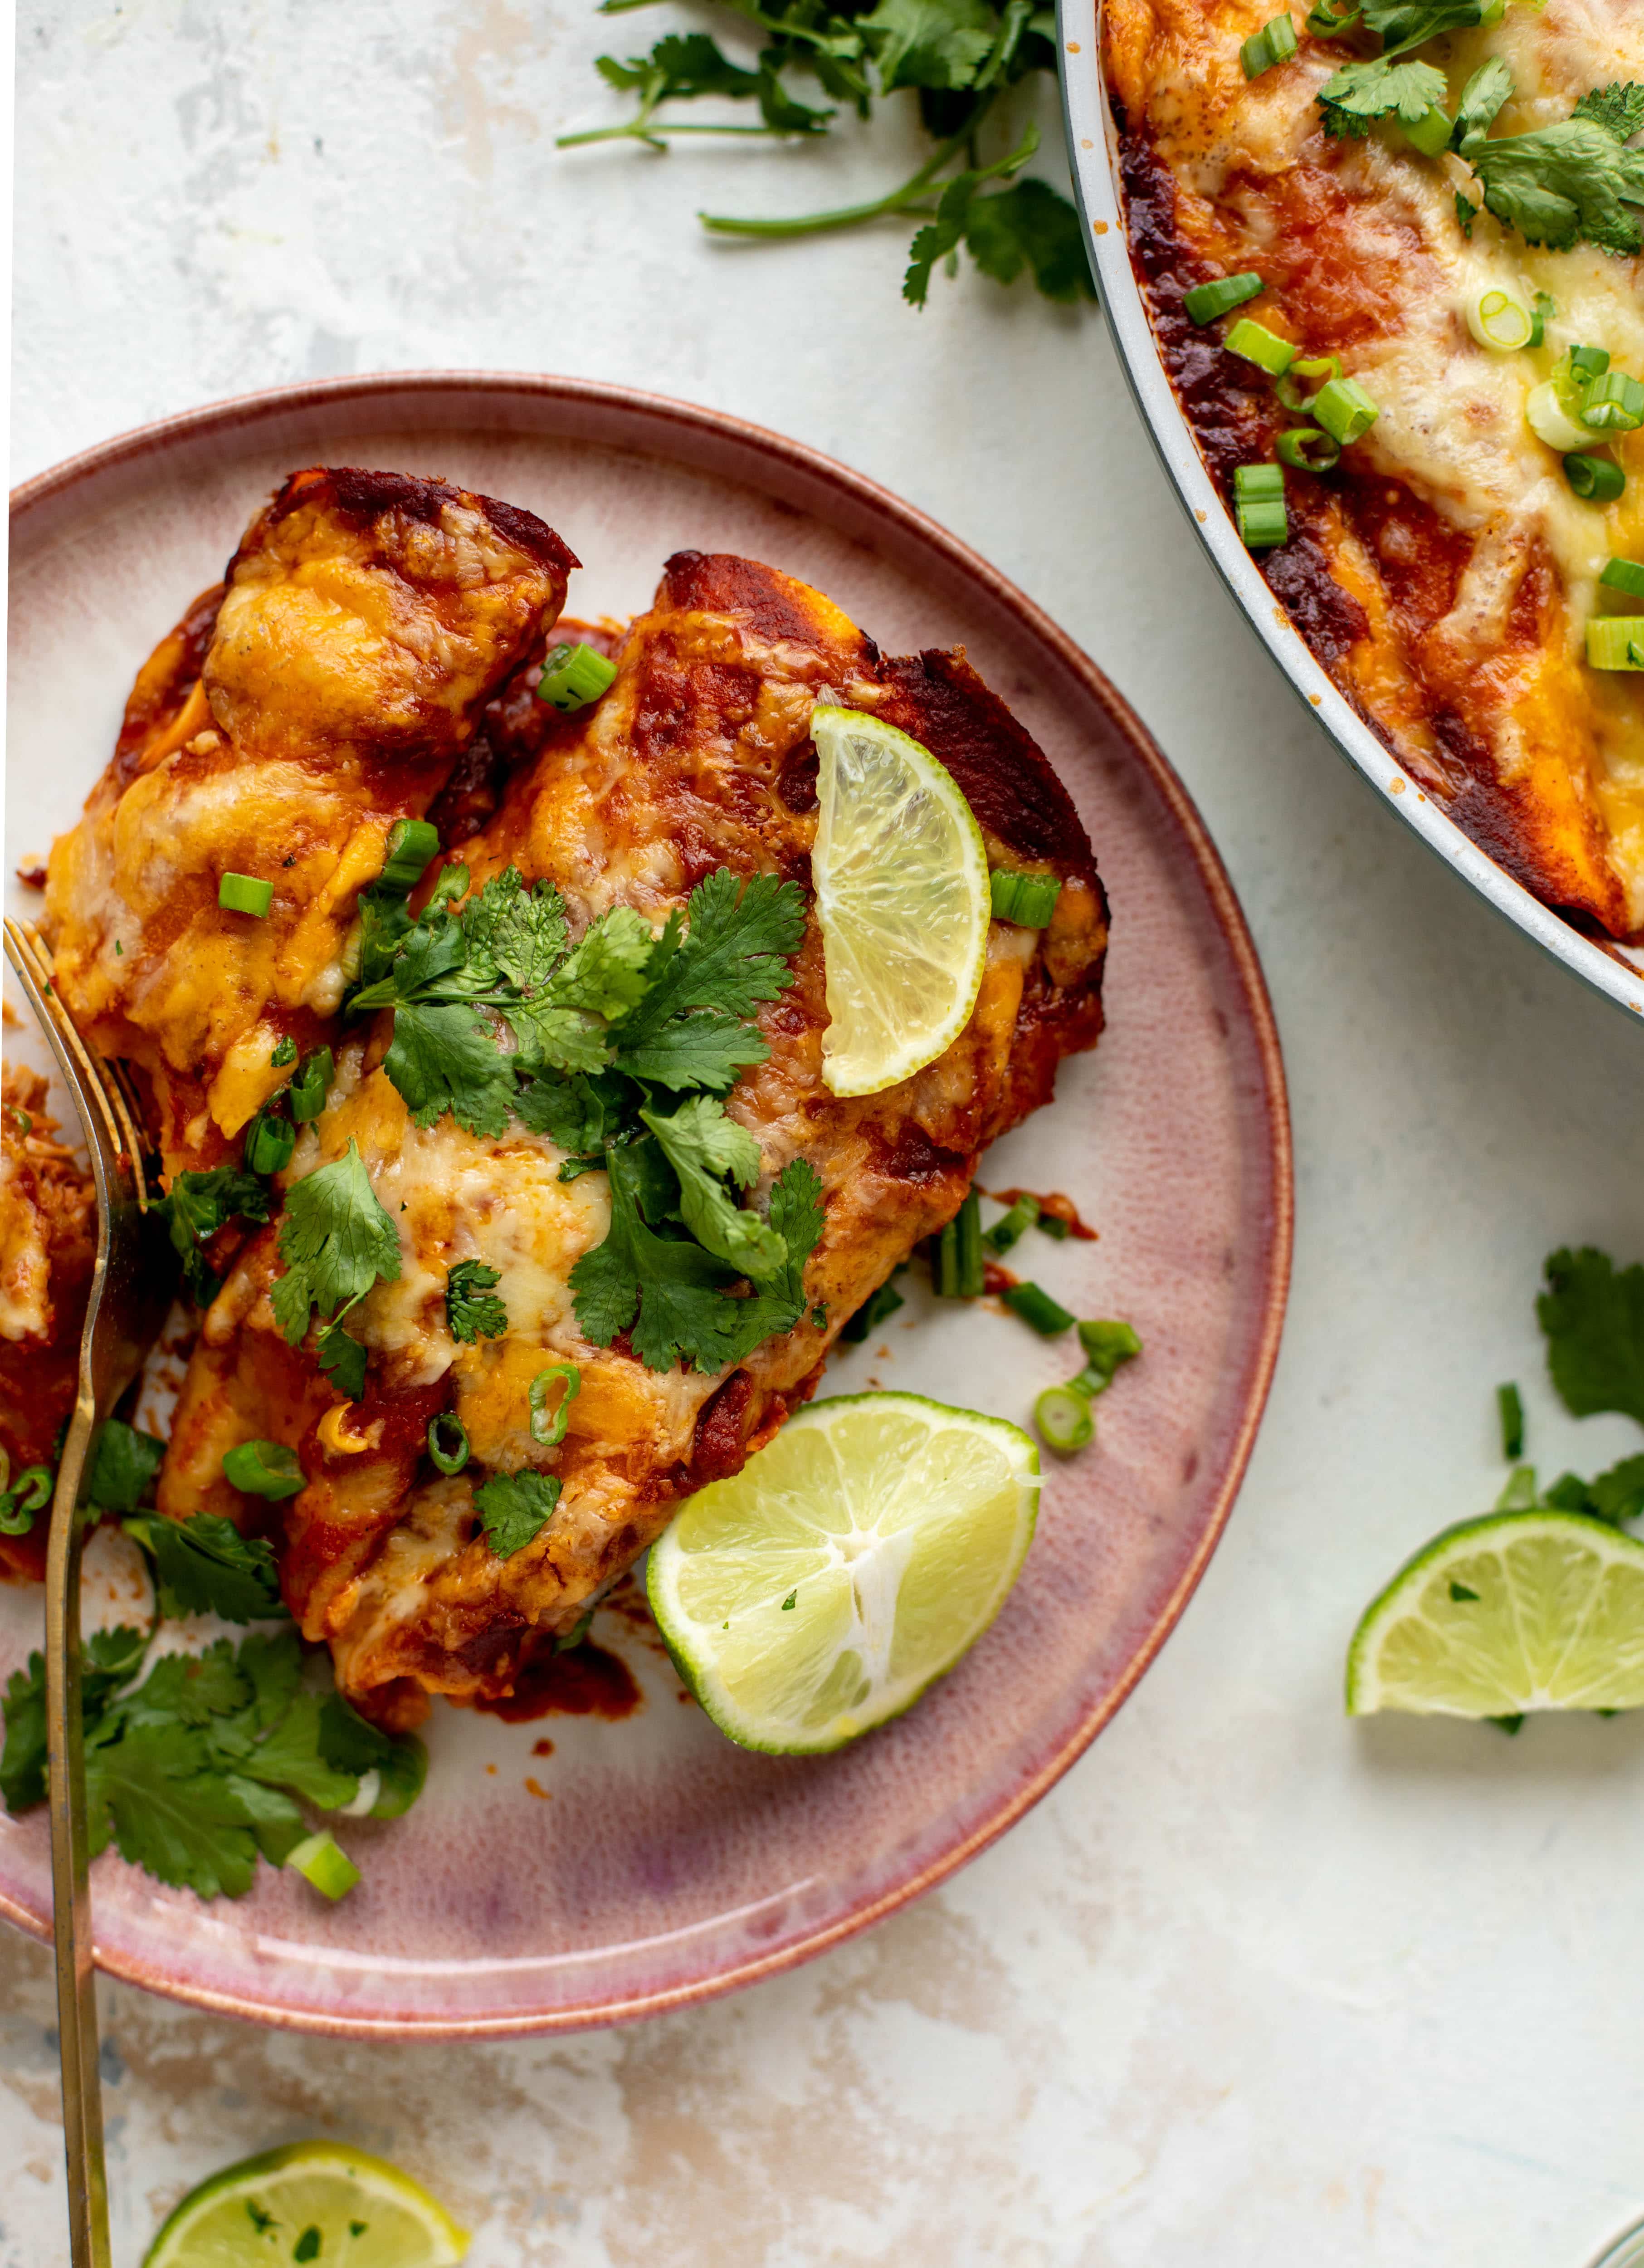 Chipotle chicken skillet enchiladas are loaded with flavor and come together so quickly! They are the perfect spicy weeknight meal.